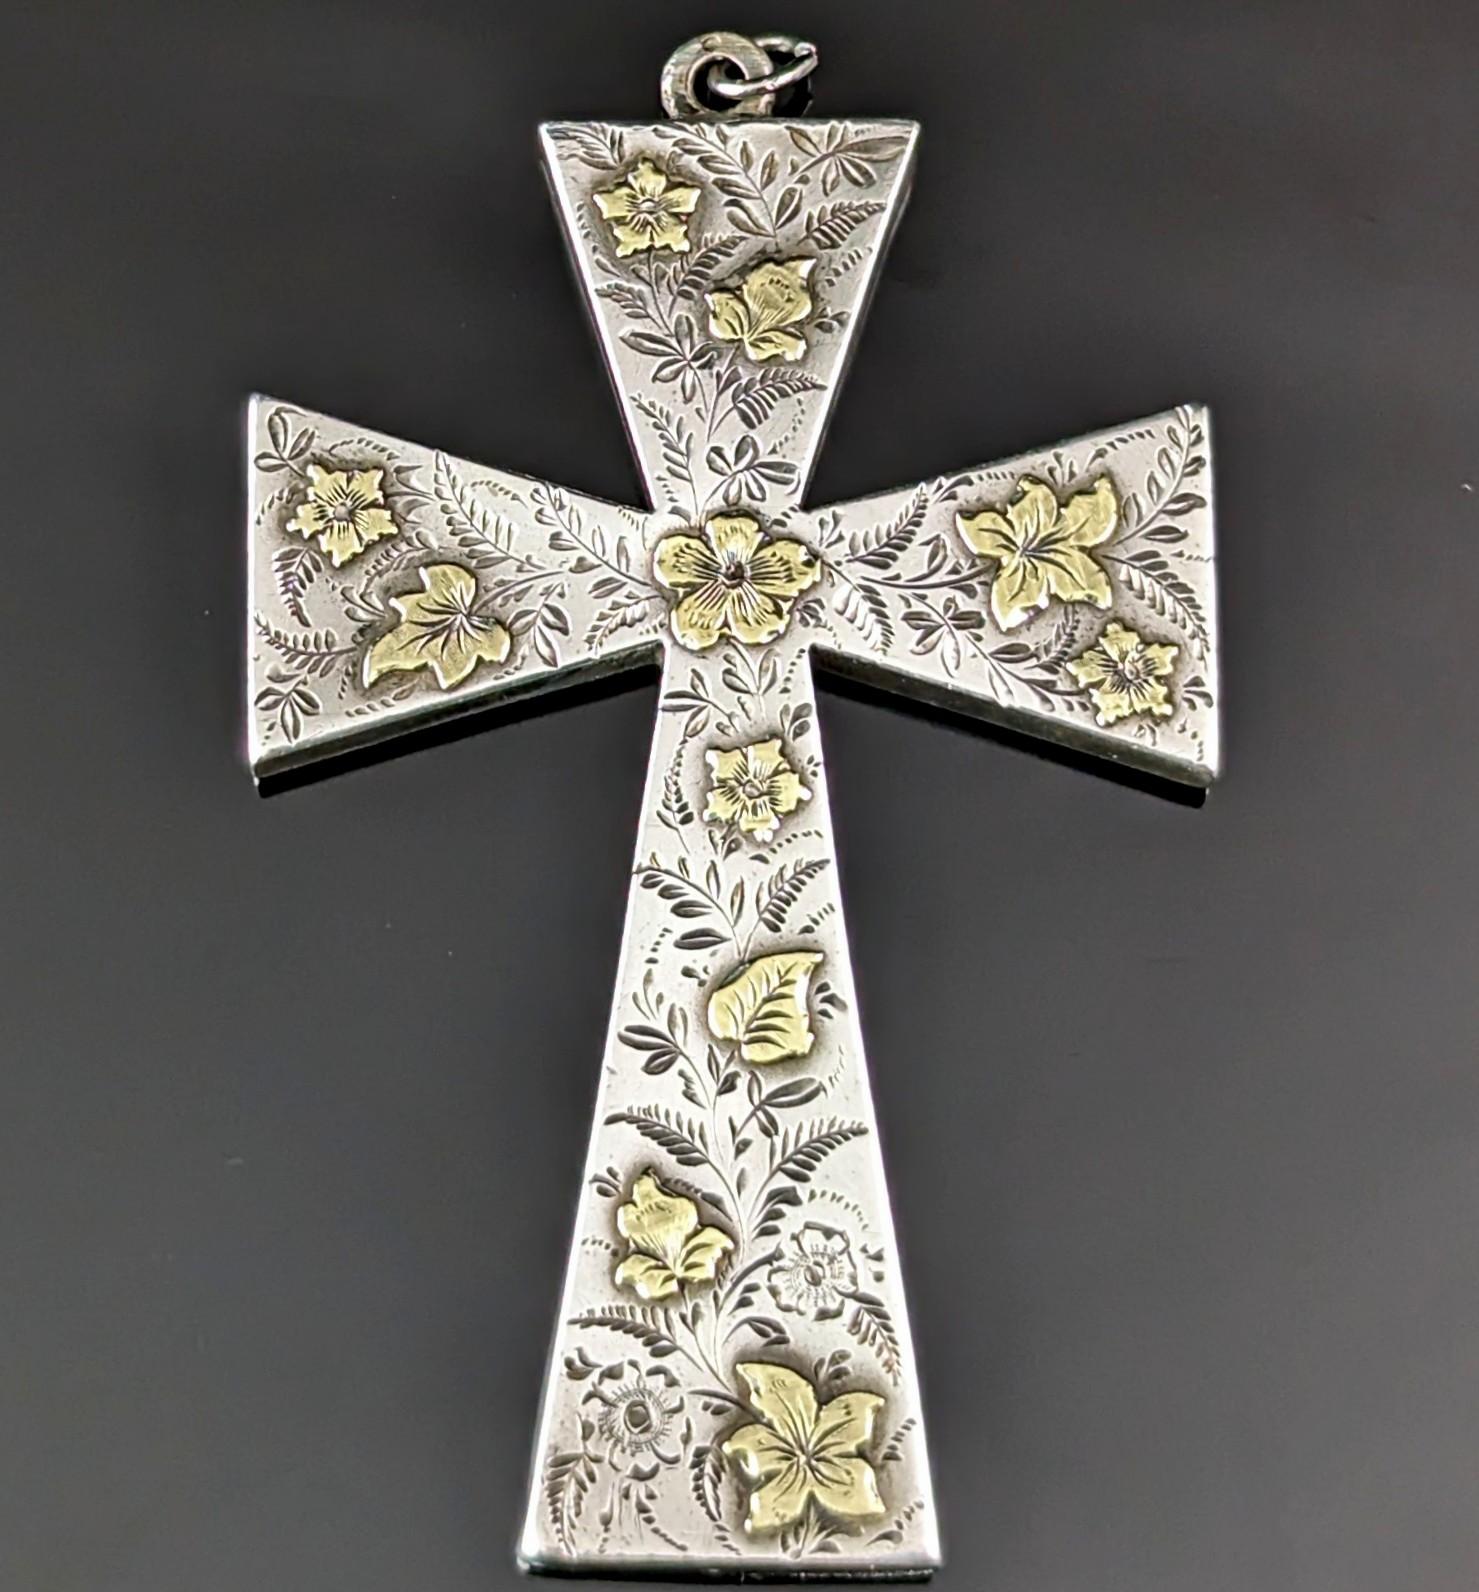 This beautiful antique Victorian aesthetic era cross pendant is striking and delicate at the same time.

It is a large sized cross pendant crafted in sterling silver with applied yellow gold leaves and flowers in a typical aesthetic design.

The